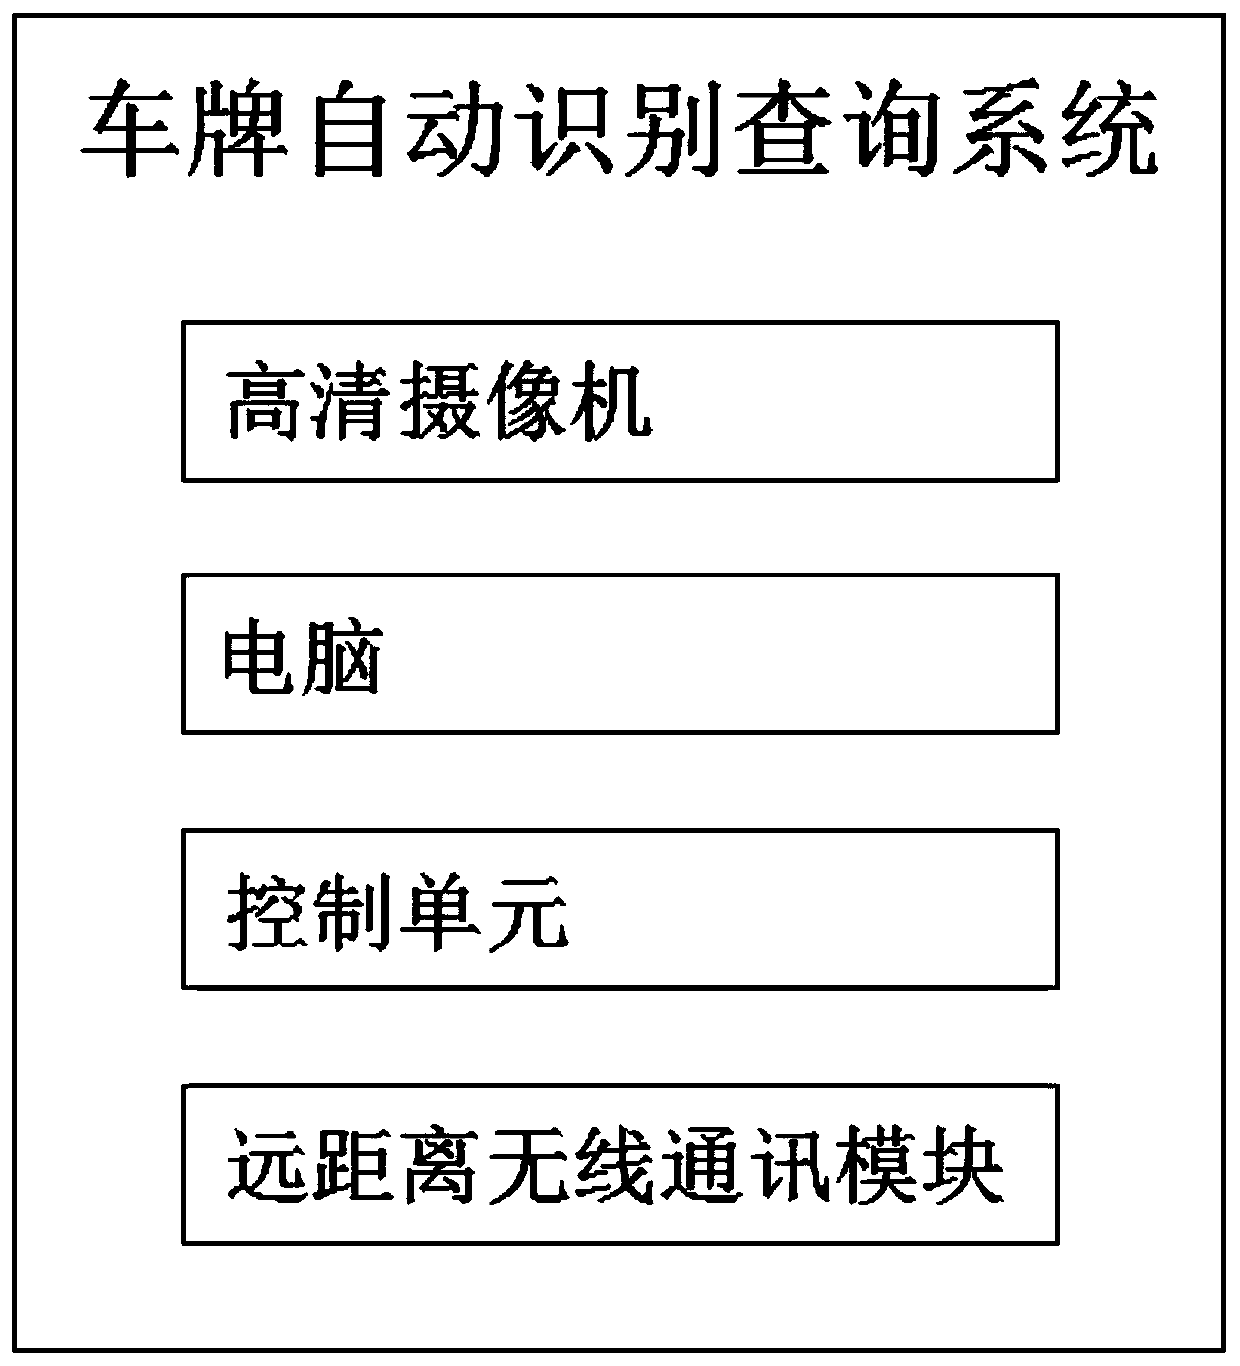 Vehicle electronic identification card and automatic license plate identification and query supervision system